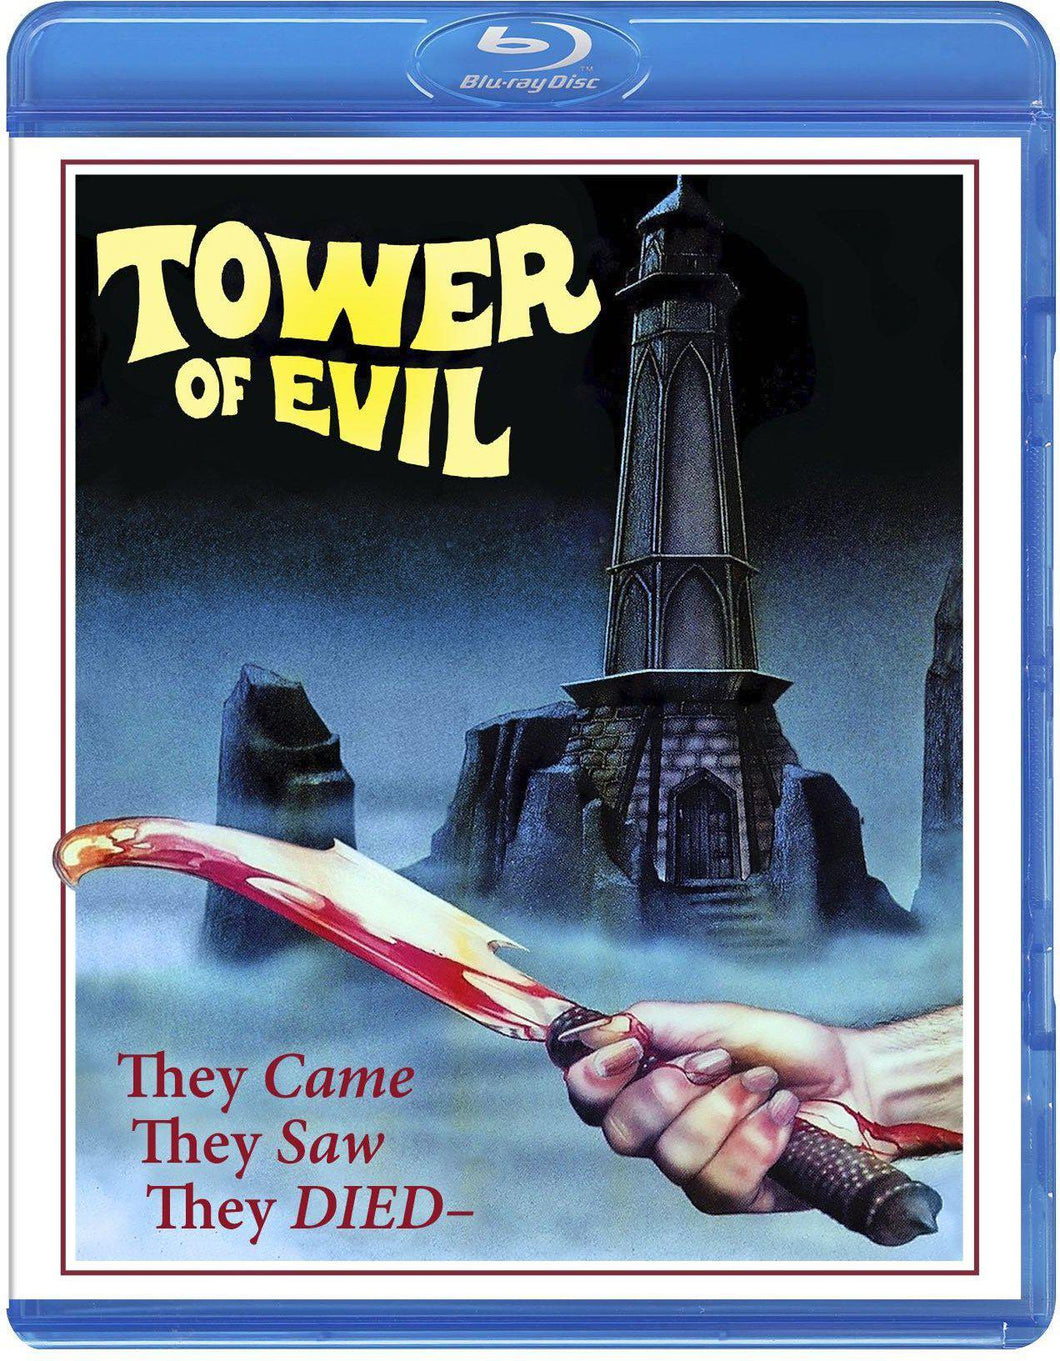 Tower of Evil (Blu-ray): Ronin Flix